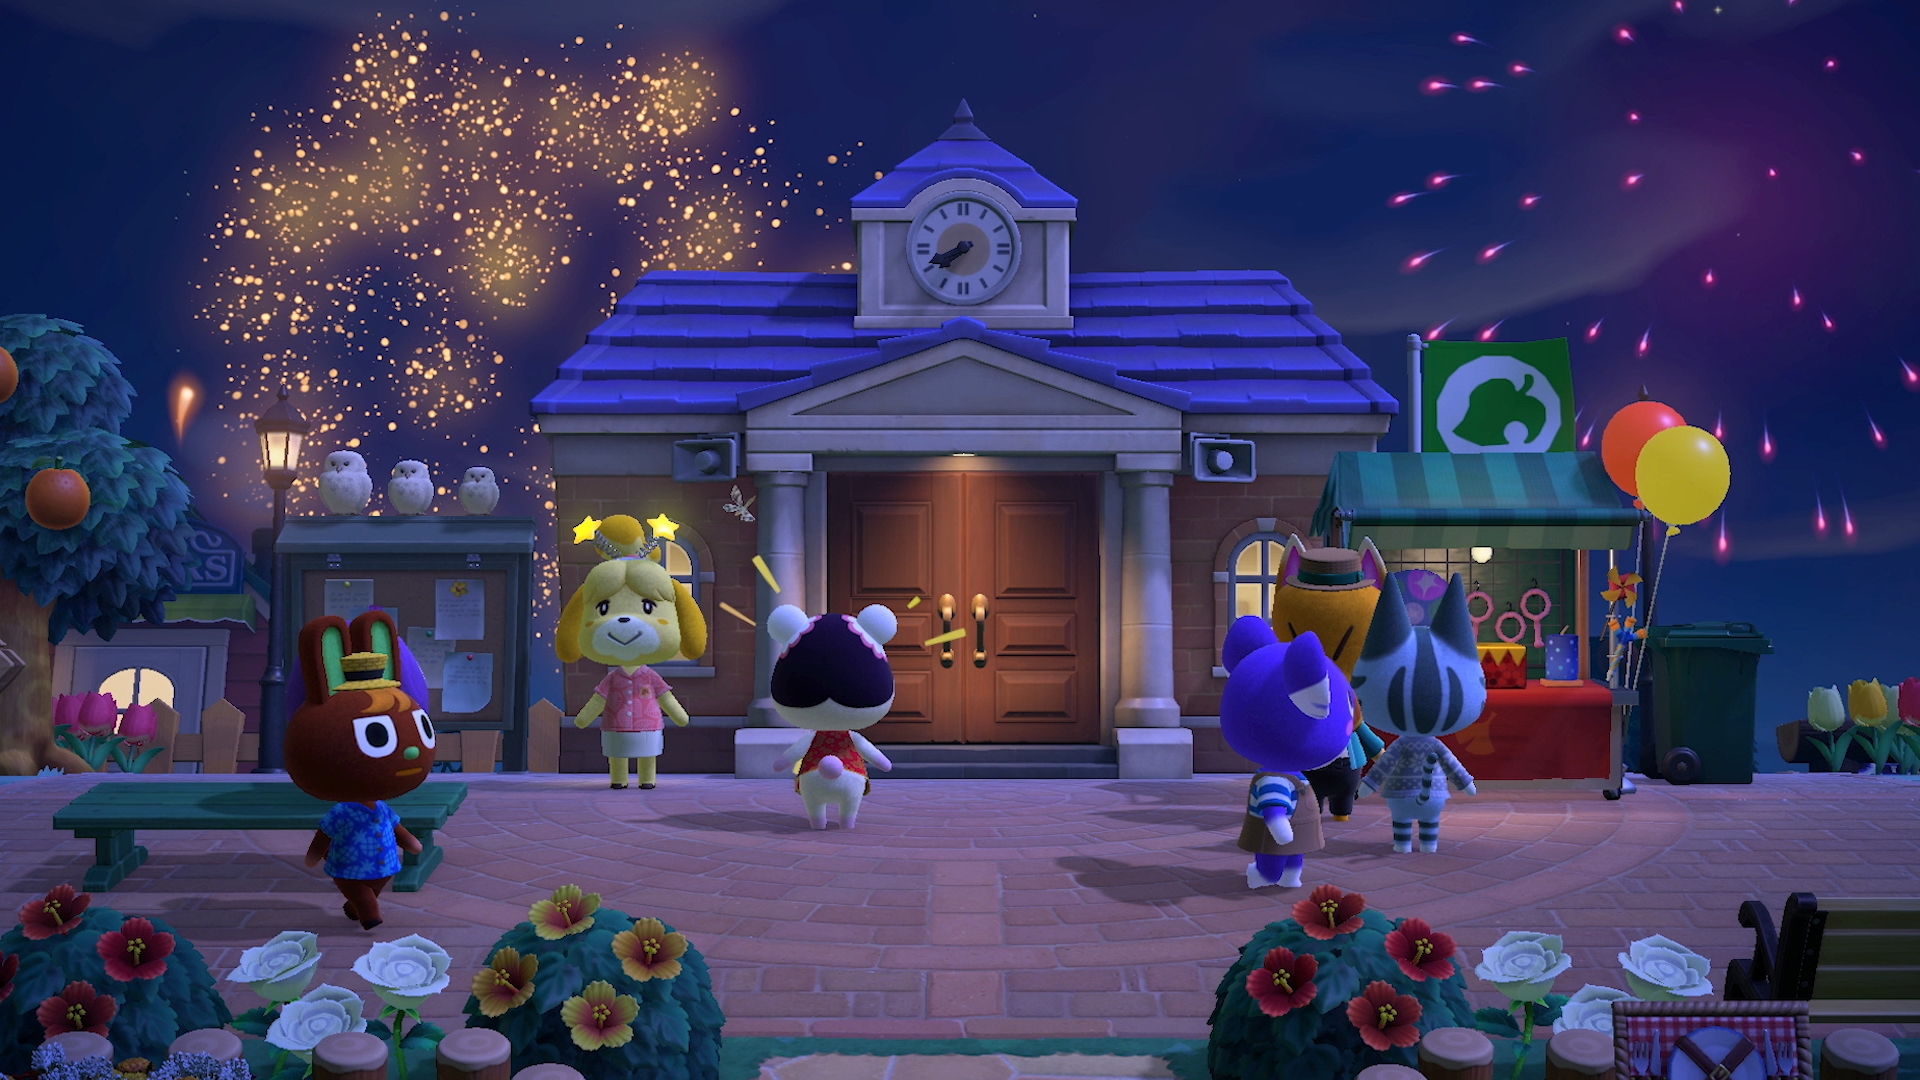 Nintendo News Fireworks Shows Dreaming And More Make Their Way To Animal Crossing New Horizons Let S Talk About Video Games - roblox developers expected to earn over 250 million in 2020 platform now has over 150 million monthly active users business wire